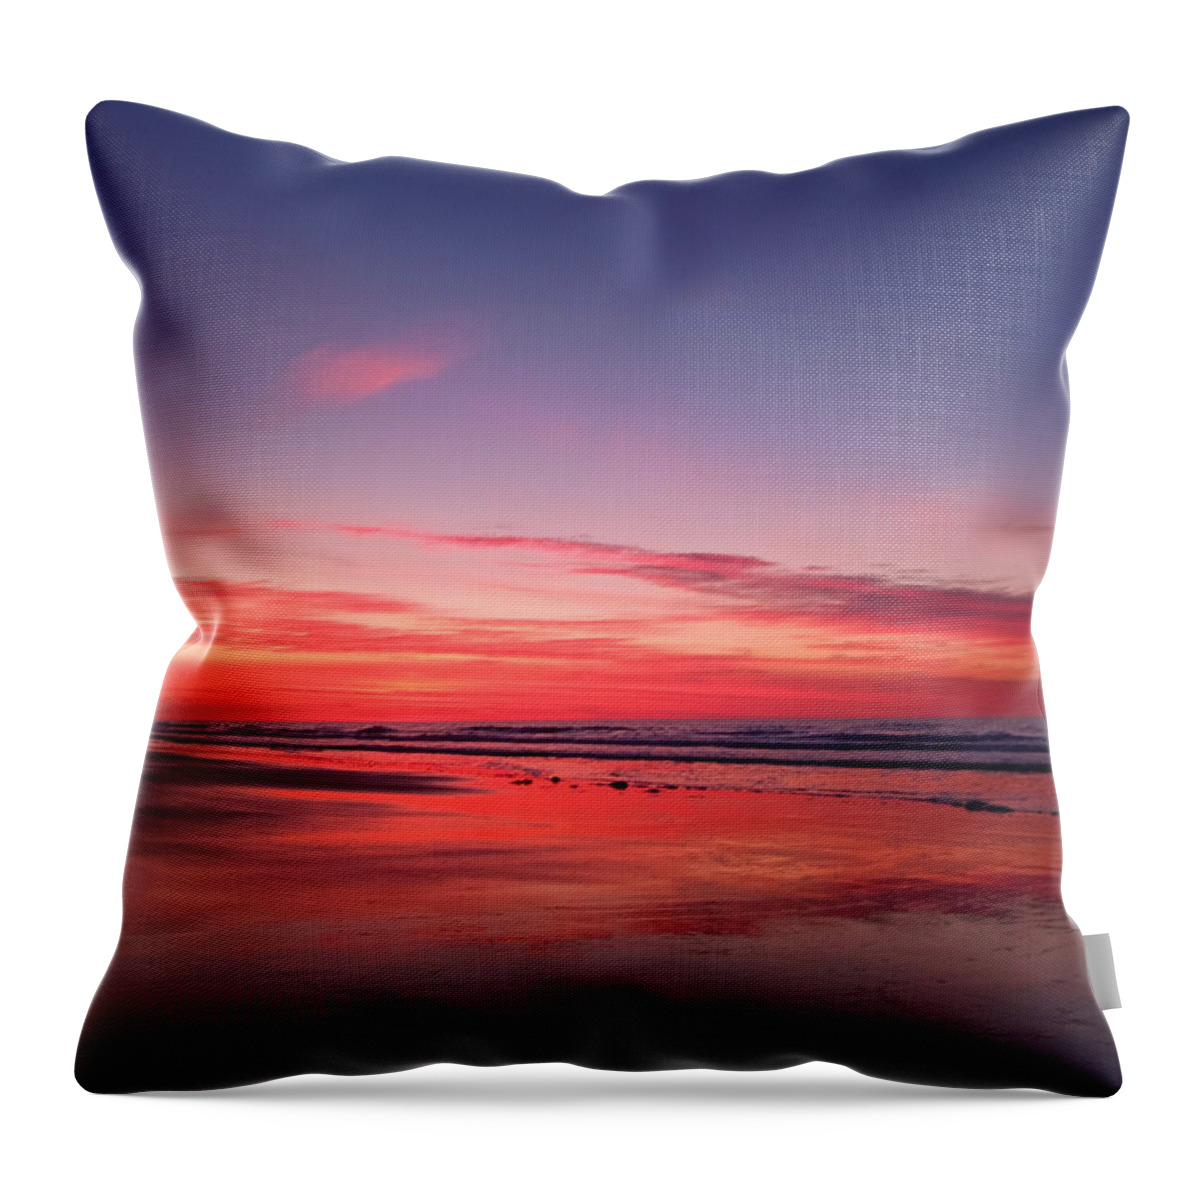 Sunrise Throw Pillow featuring the photograph Waiting For Sunrise by Dani McEvoy